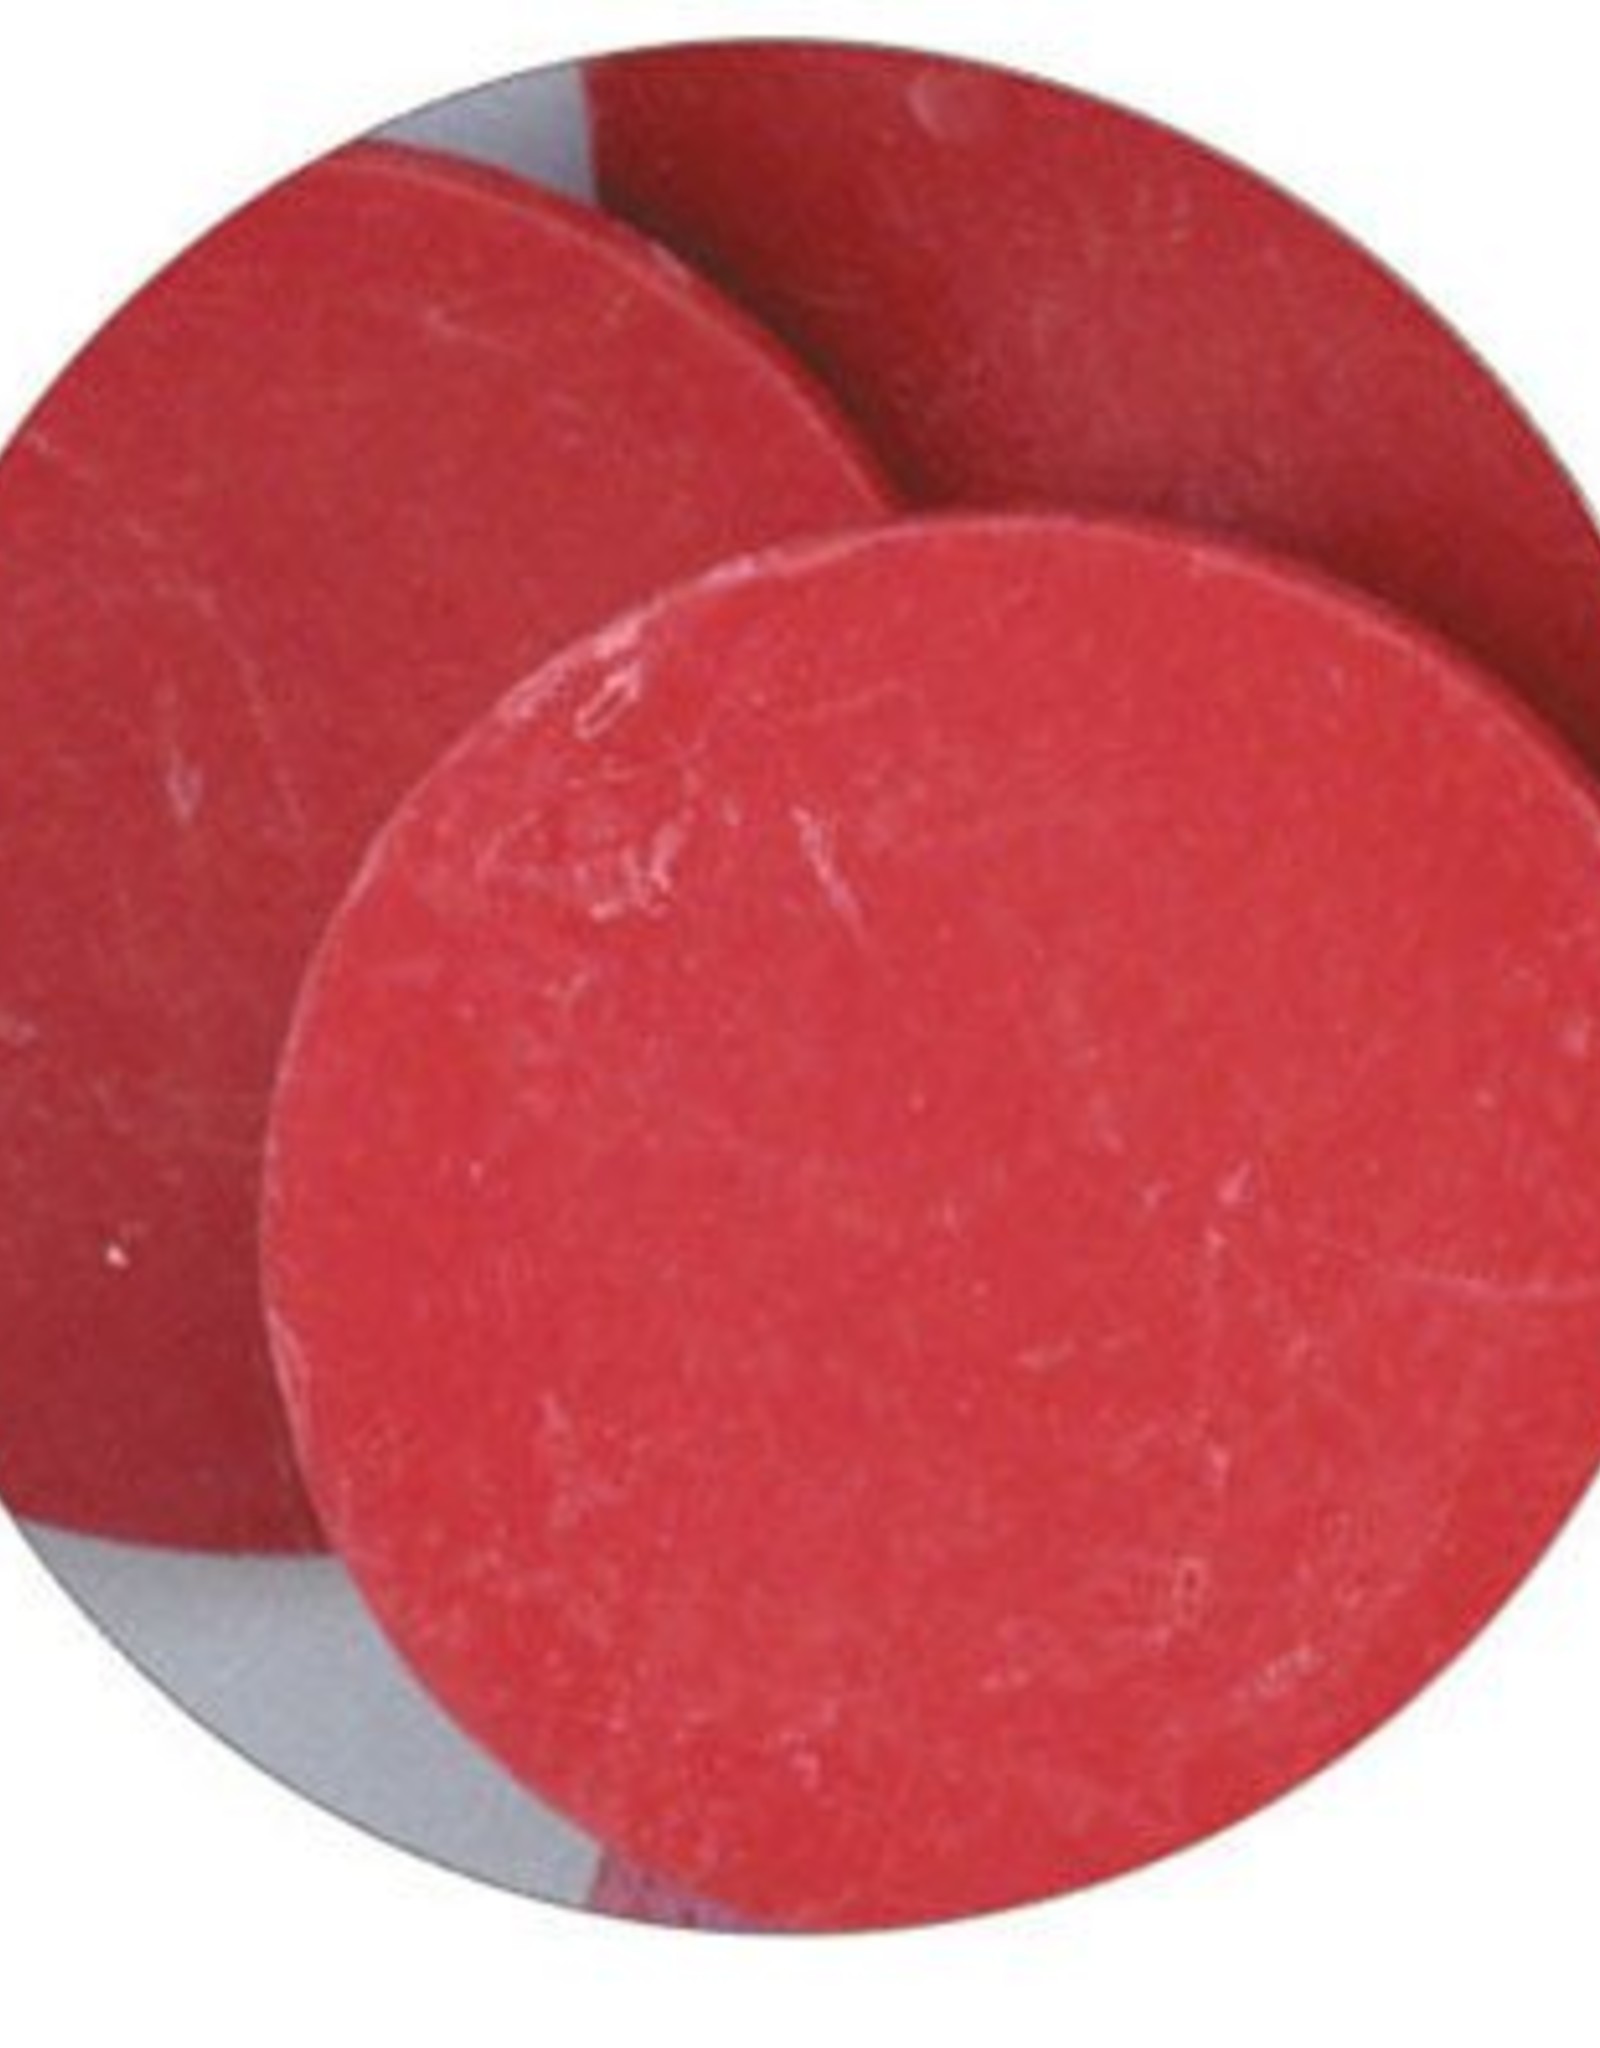 Sweet! Candy Coating (Red) 1lb.